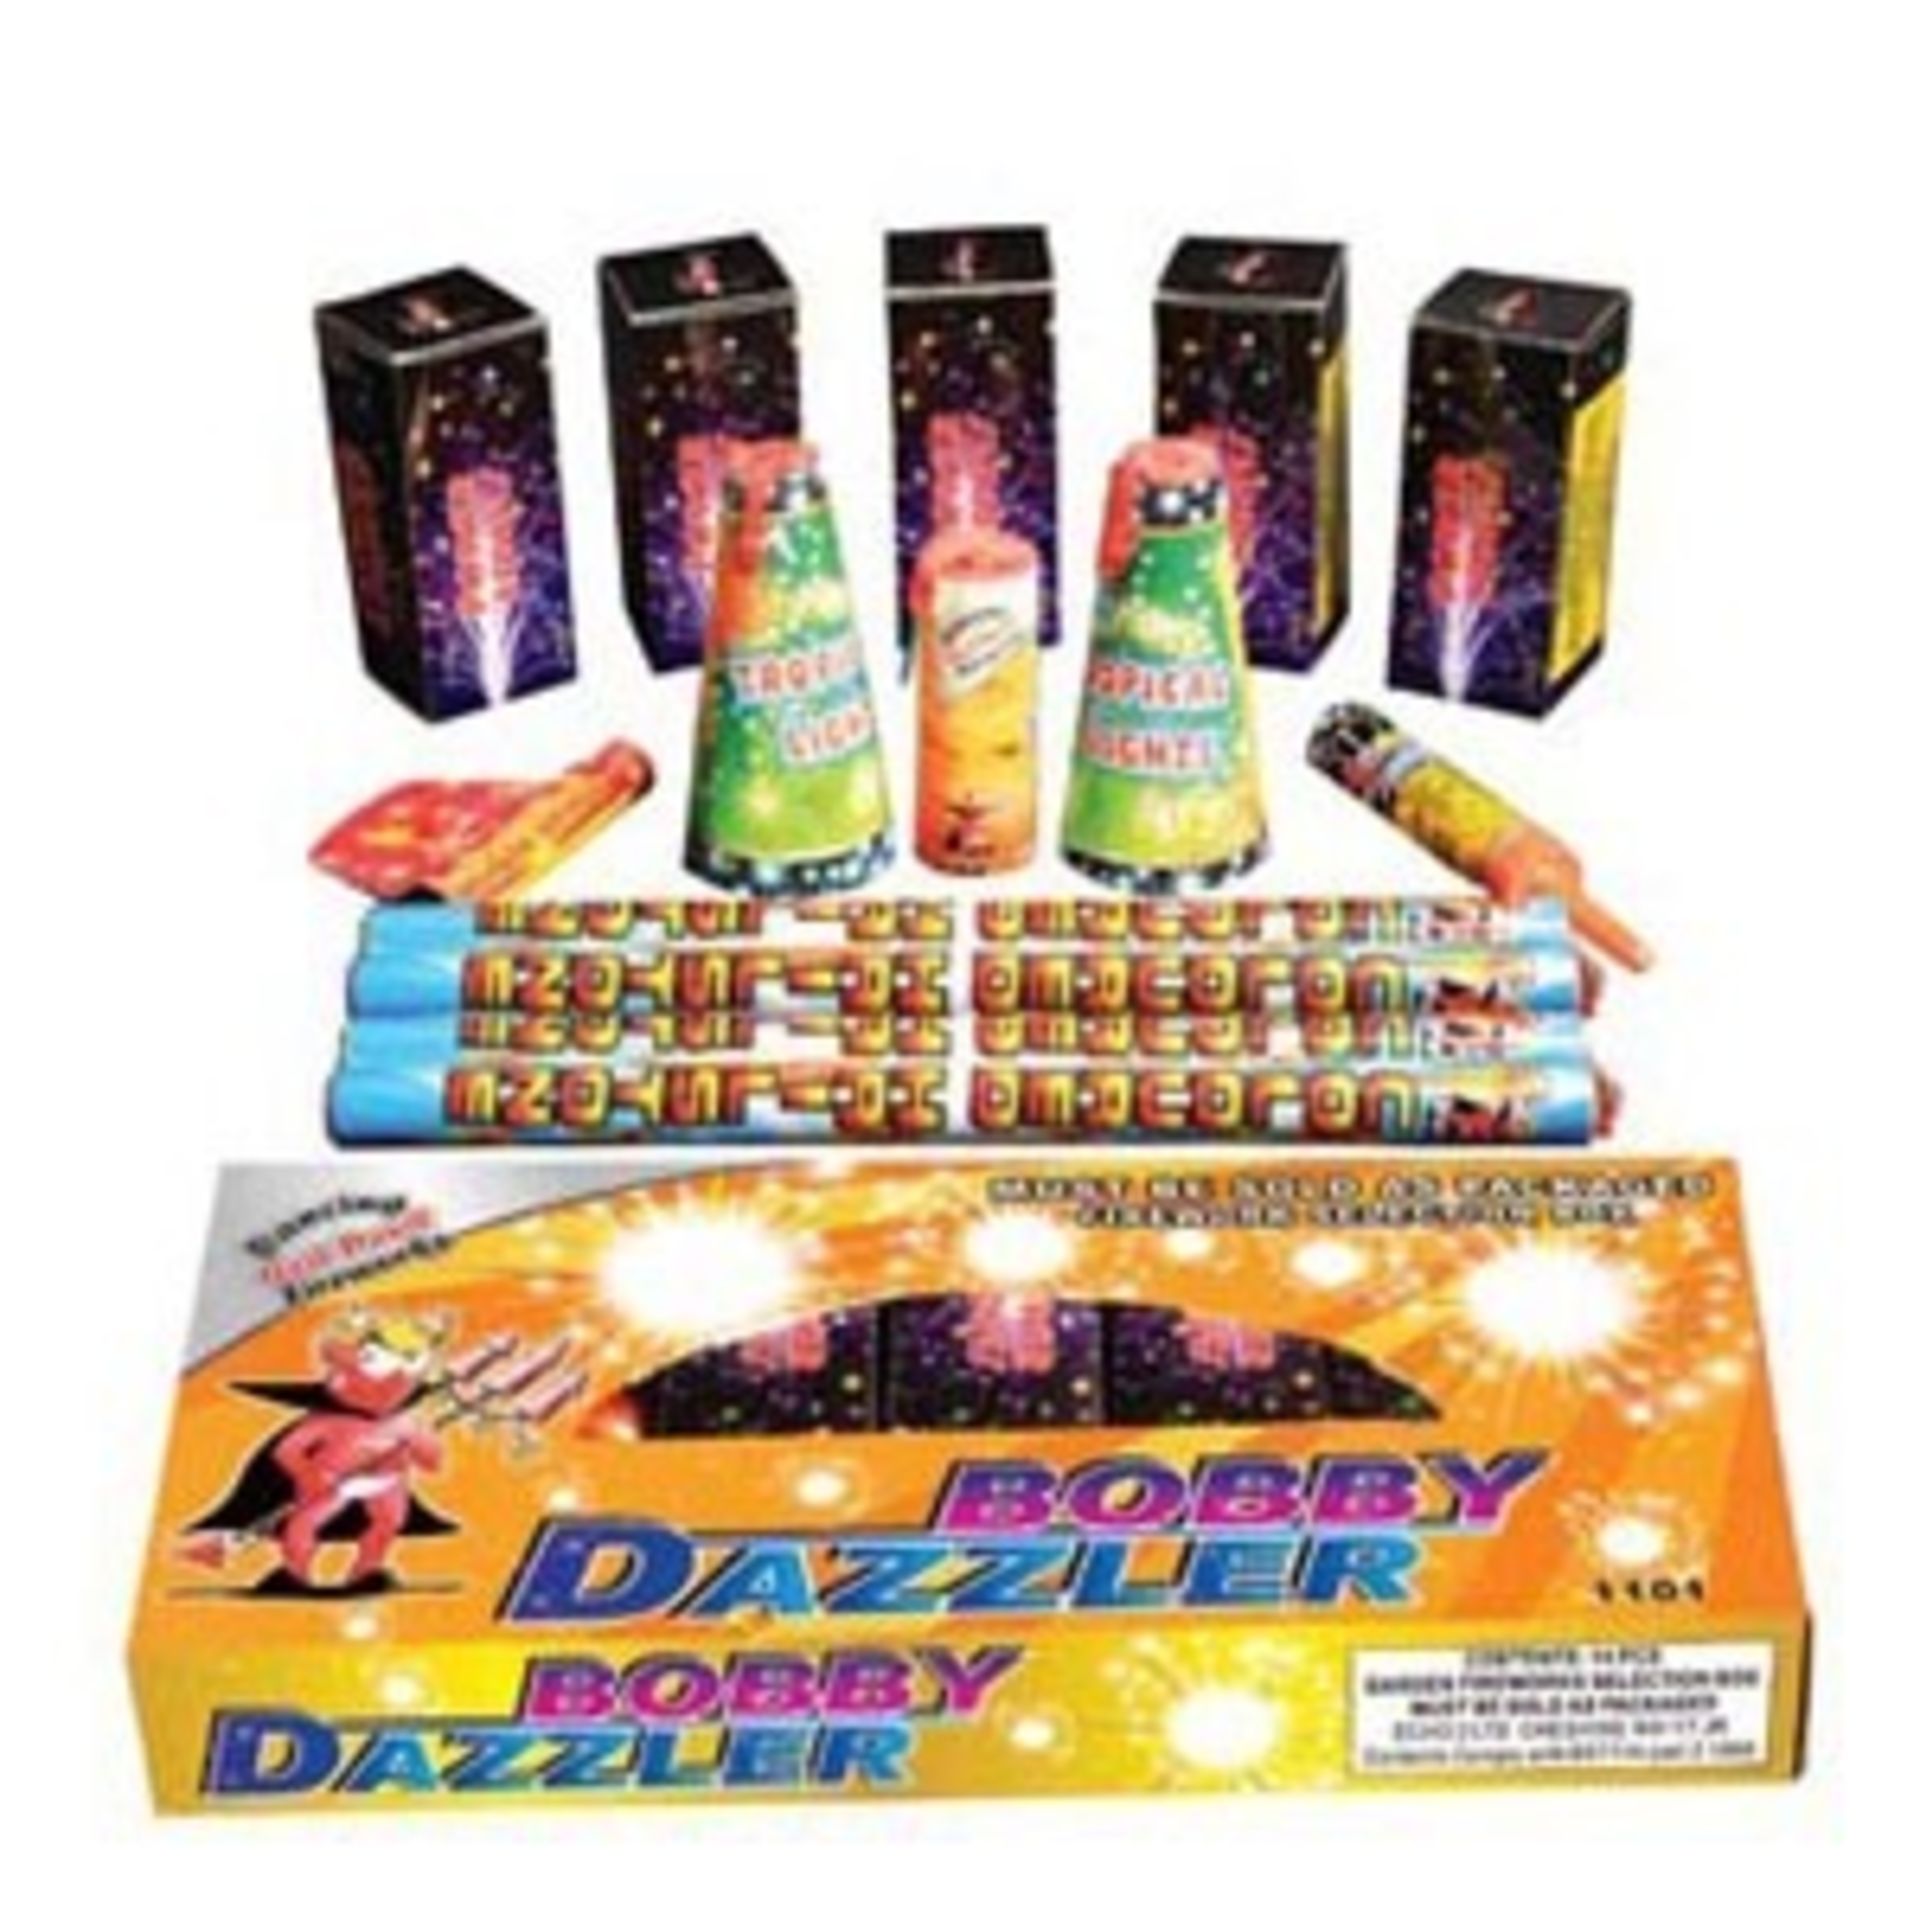 24 x Dancing Red Devil Fireworks - Bobby Dazzler 14 Piece Selection Boxes. Please note: NO